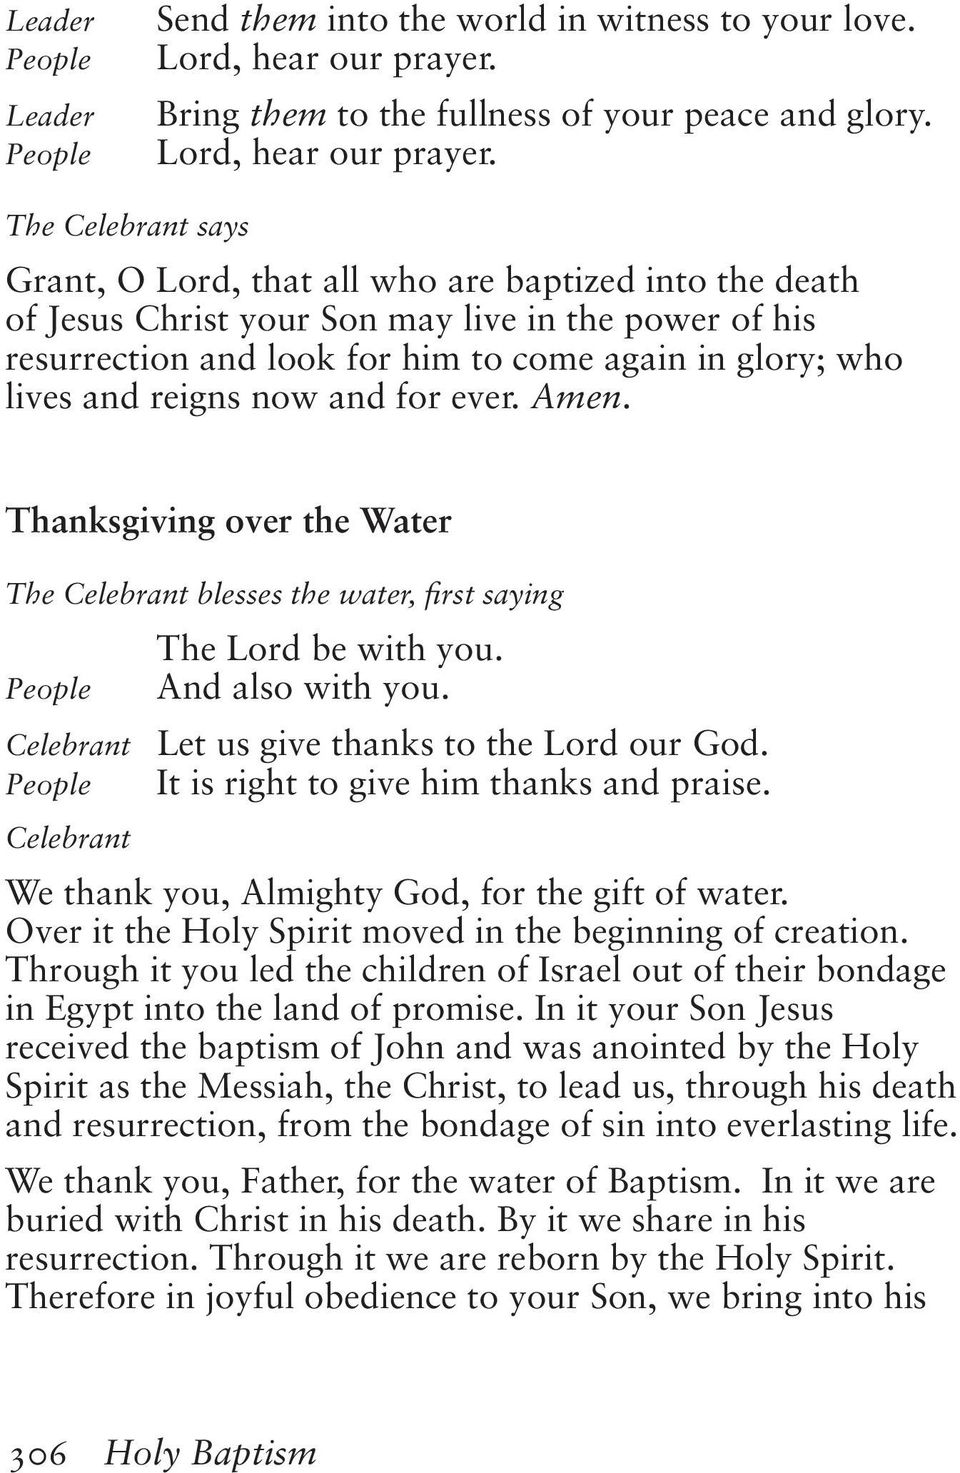 The Celebrant says Grant, O Lord, that all who are baptized into the death of Jesus Christ your Son may live in the power of his resurrection and look for him to come again in glory; who lives and